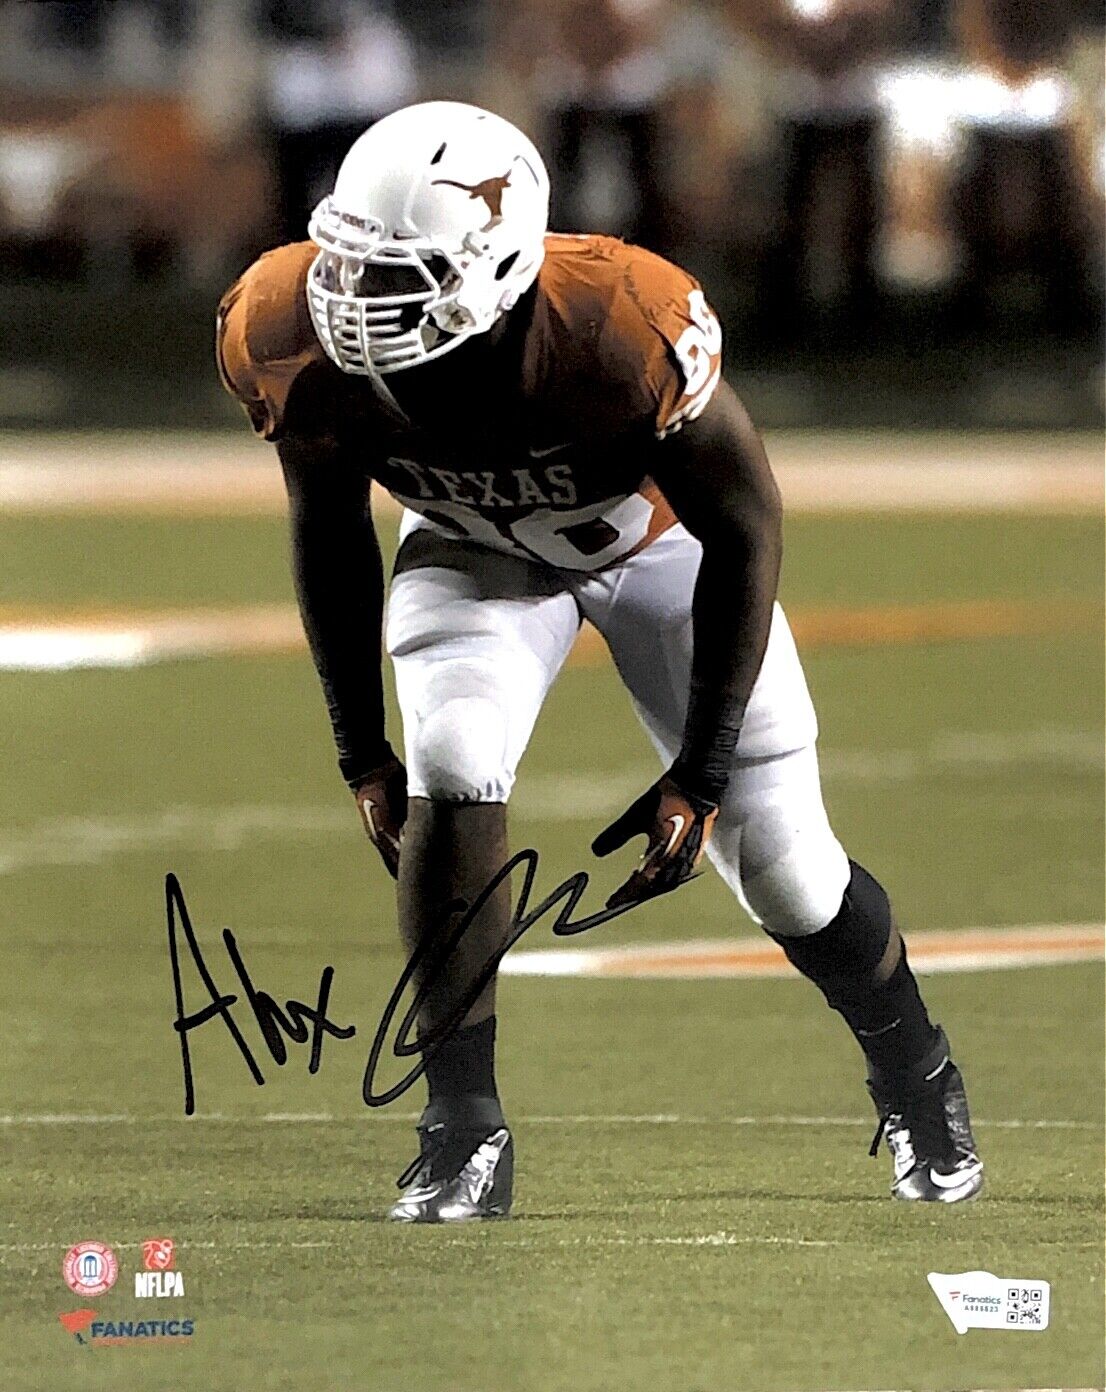 ALEX OKAFOR TEXAS HAND SIGNED AUTOGRAPHED 8X10 Photo Poster painting WITH FANATICS COA 2